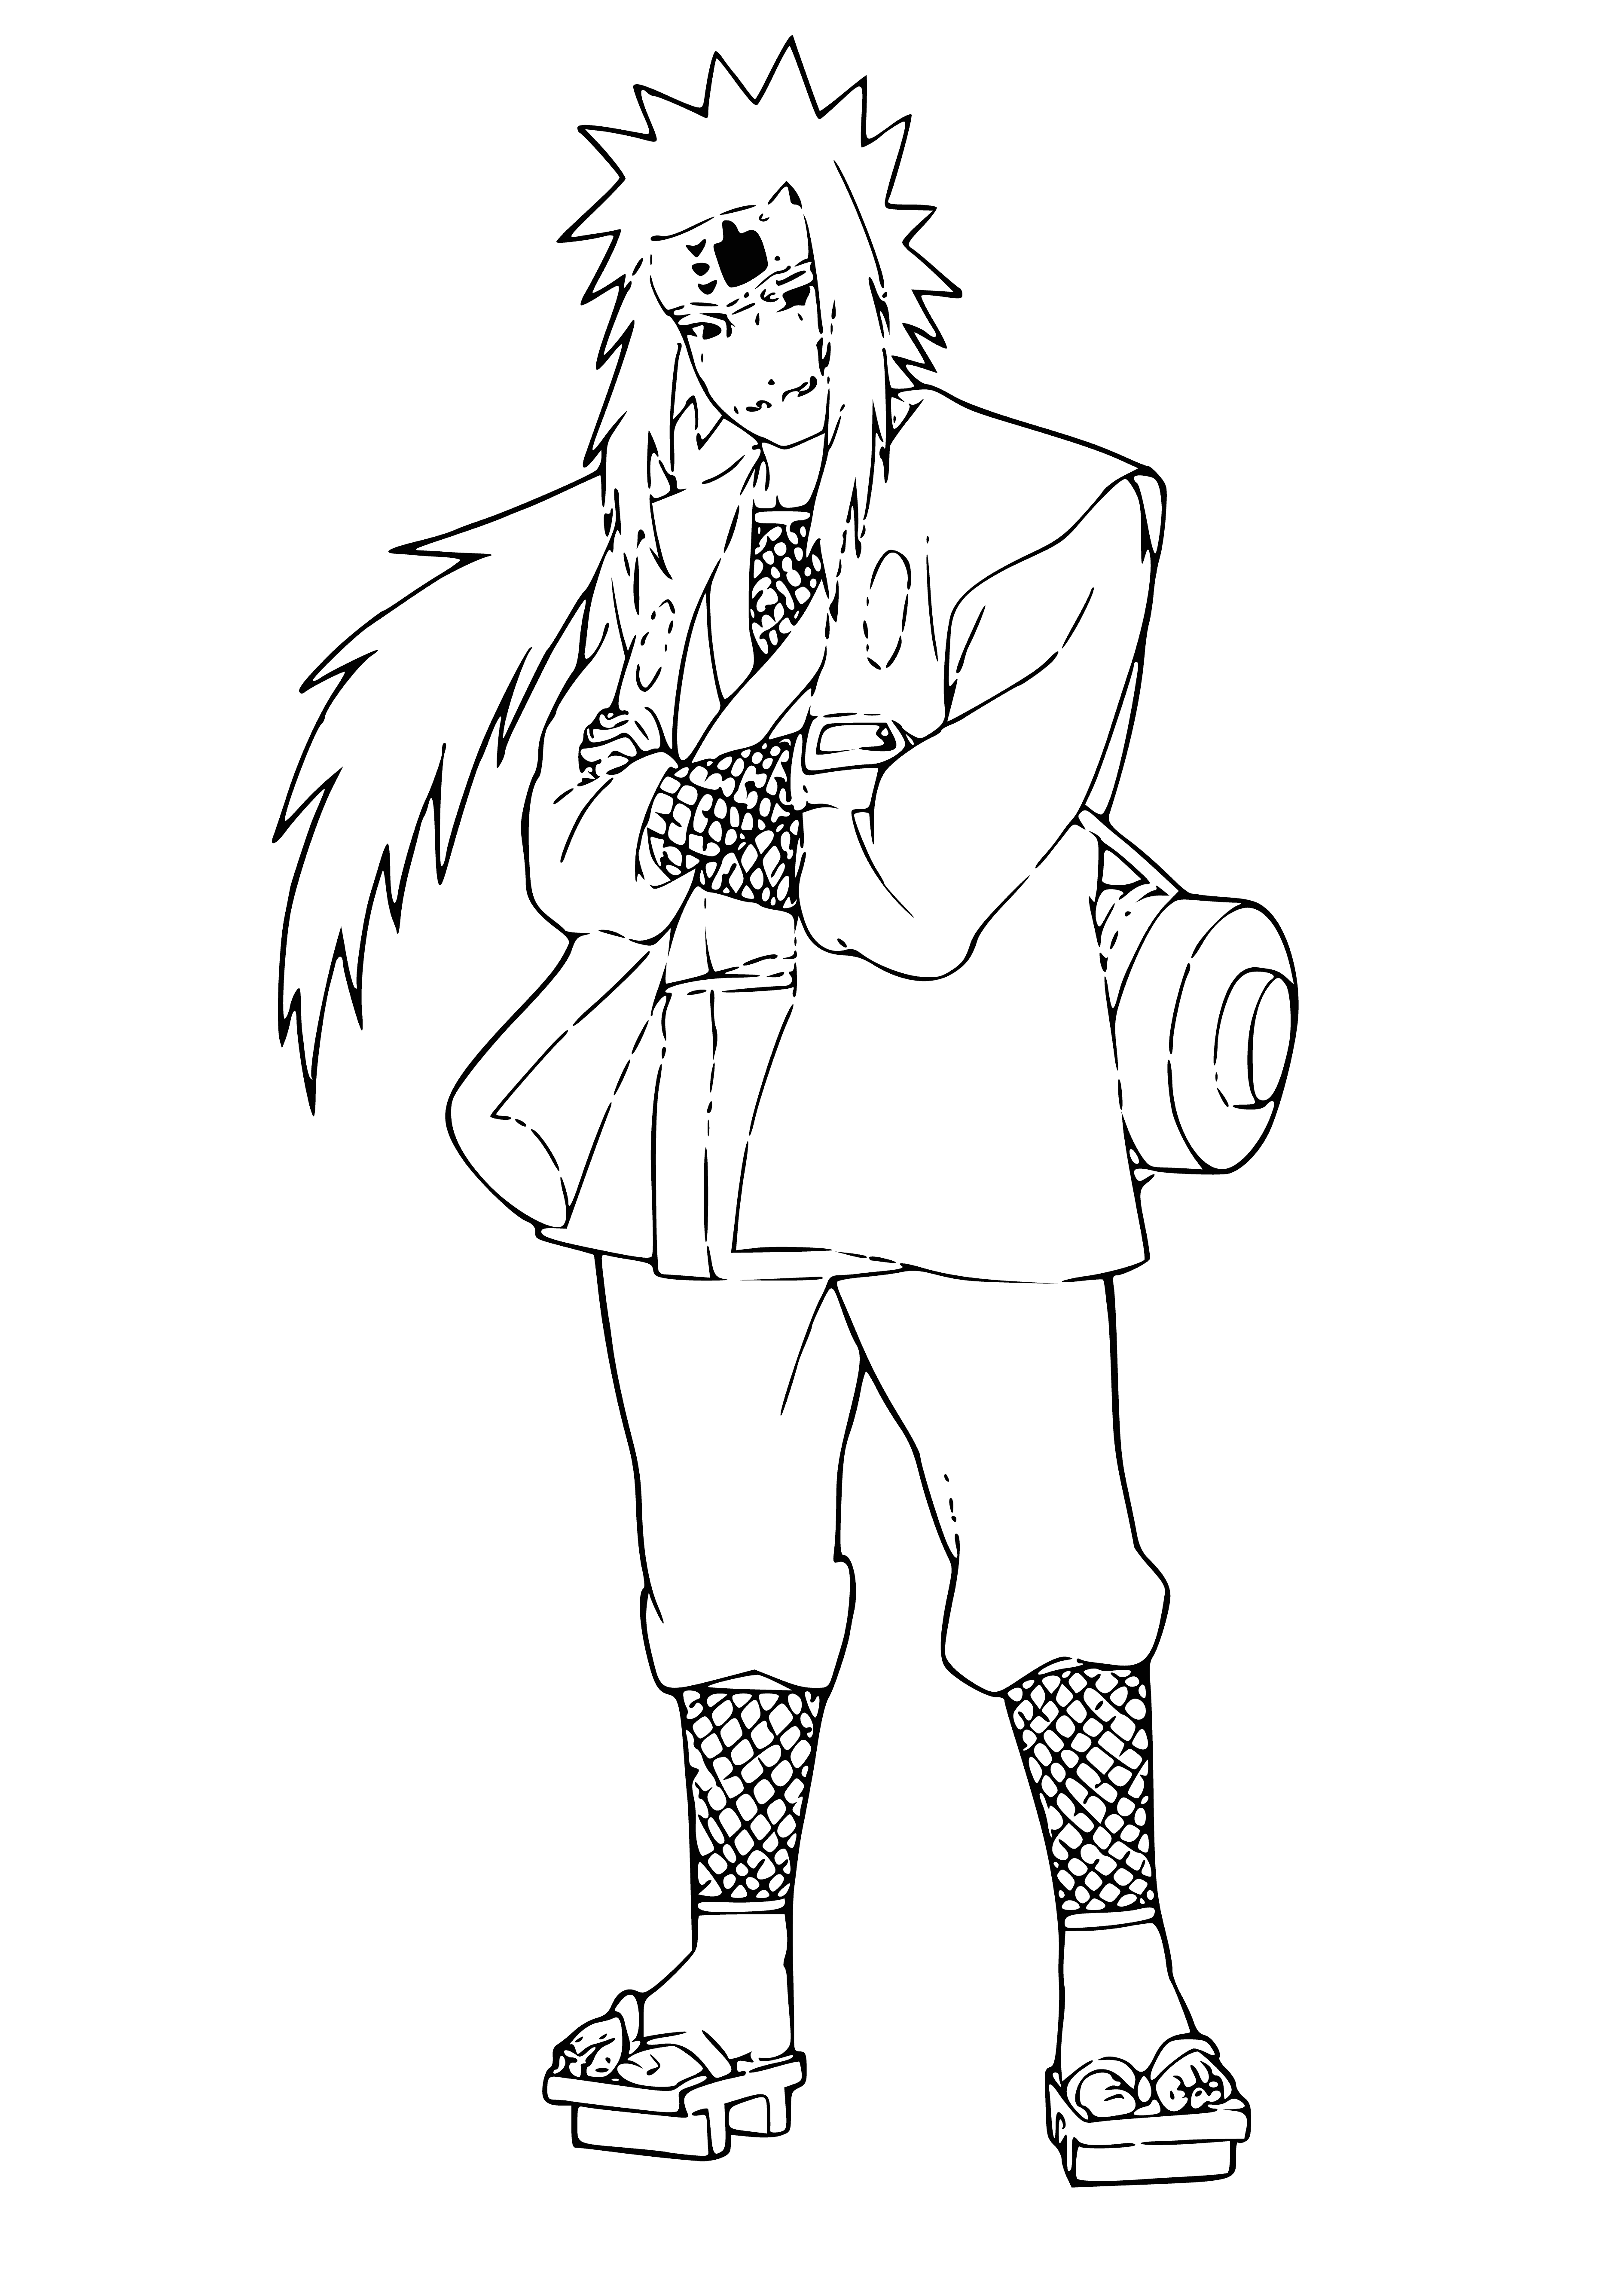 coloring page: Jiraiya: middle-aged man with white hair, wearing orange shirt, black jacket, white pants, black boots, small black hat, black scarf, sword strapped to back.